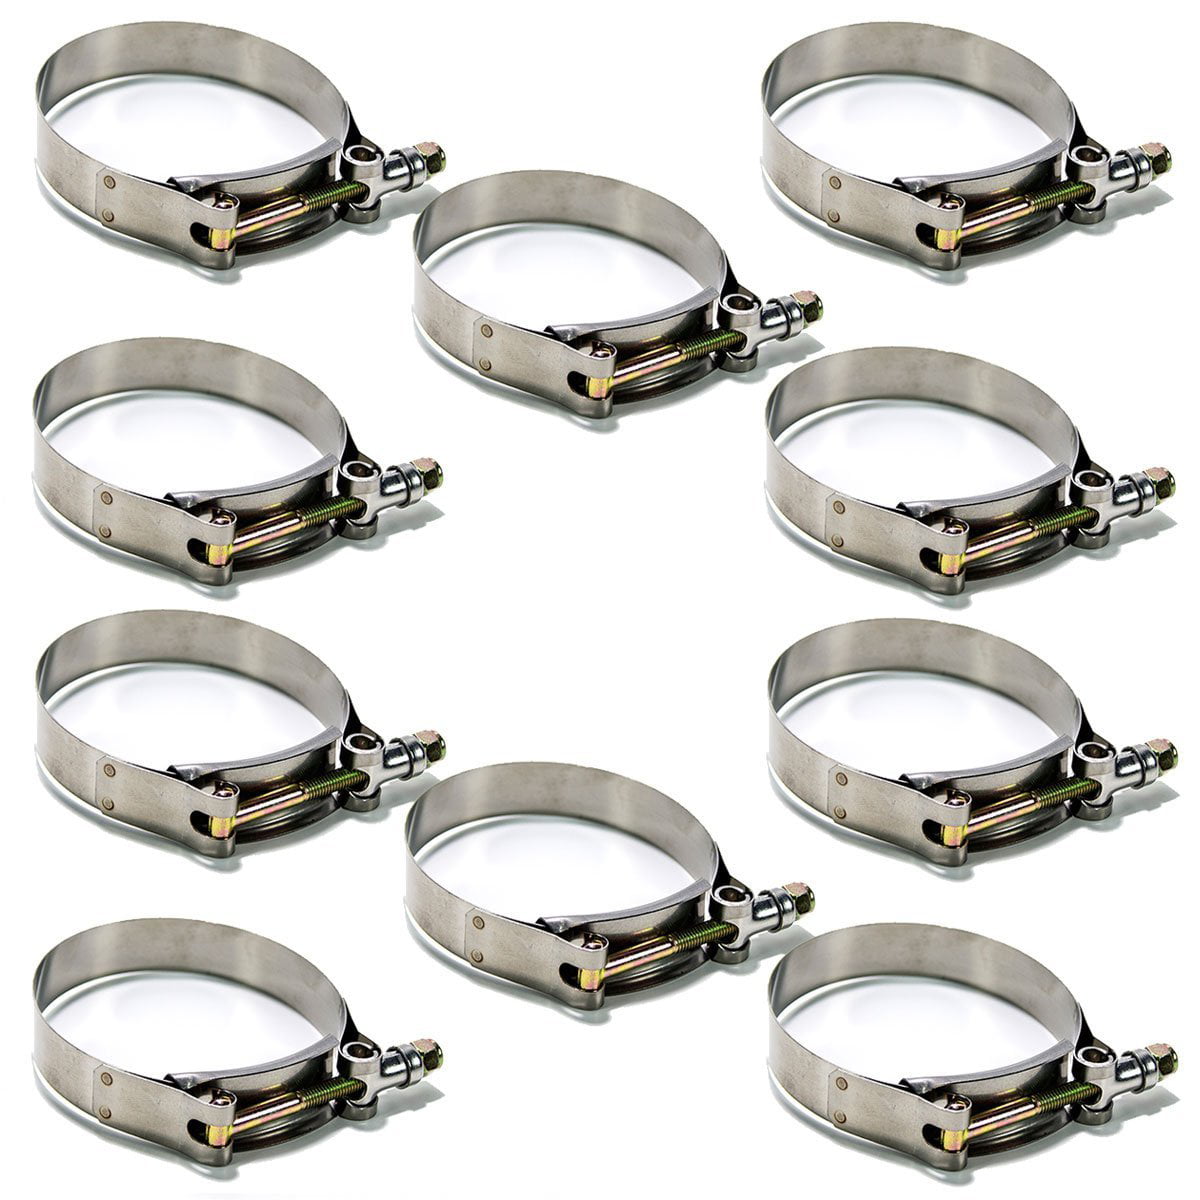 4 Pack LTI Working Range 47mm-53mm T-Bolt Clamps High PSI Premium Quality Full 304 Stainless Steel Turbo Intercooler Hose For 1.5 ID Hose 